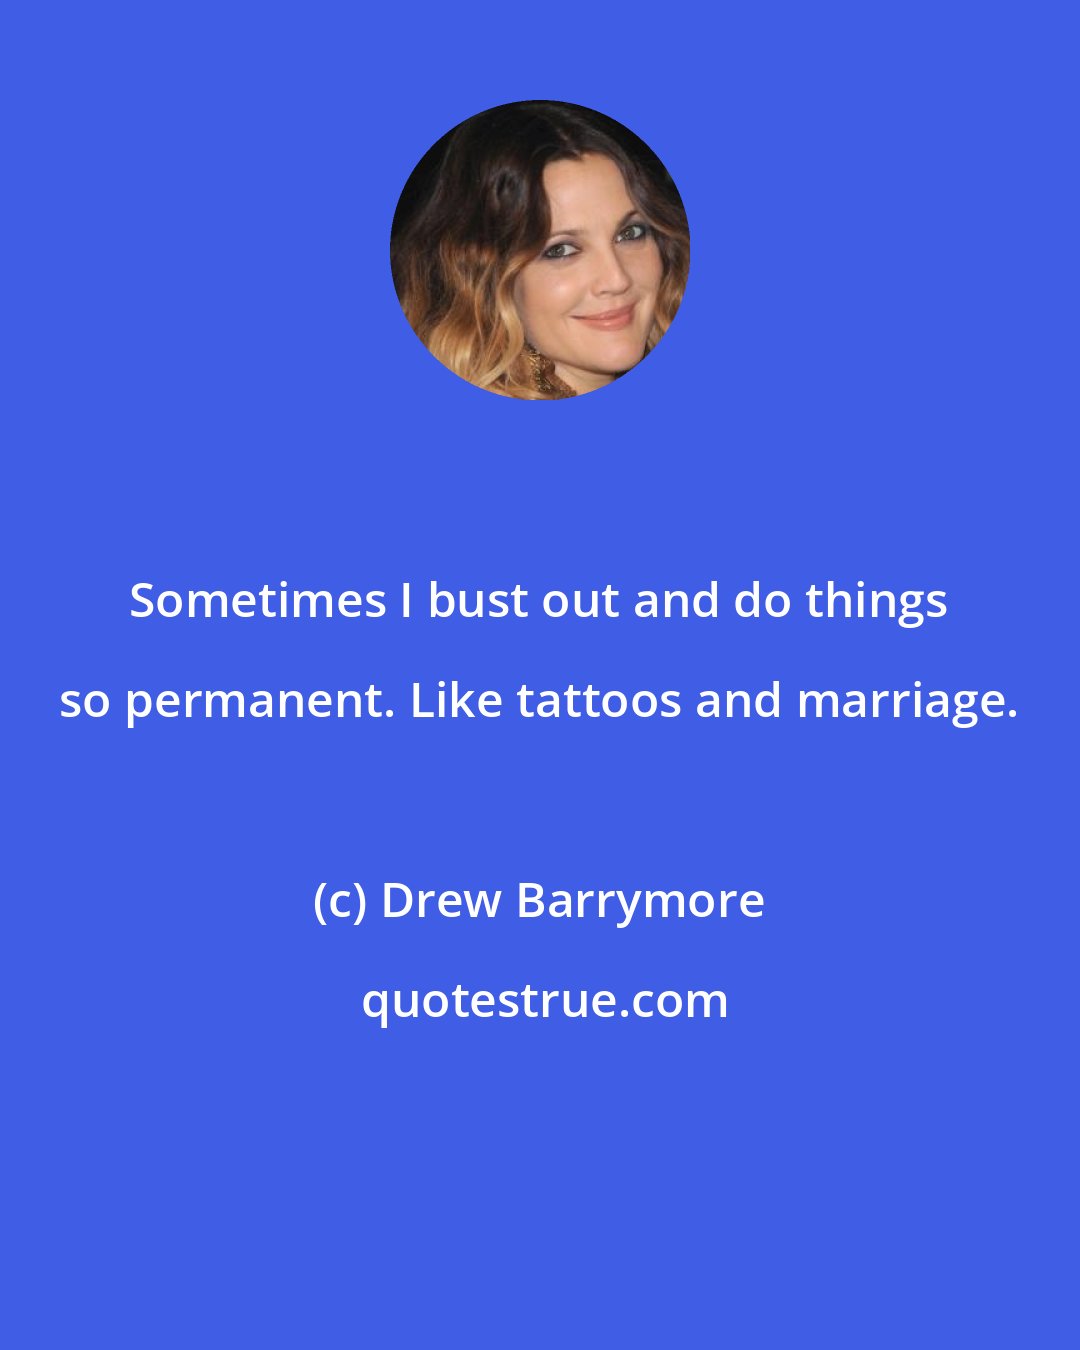 Drew Barrymore: Sometimes I bust out and do things so permanent. Like tattoos and marriage.